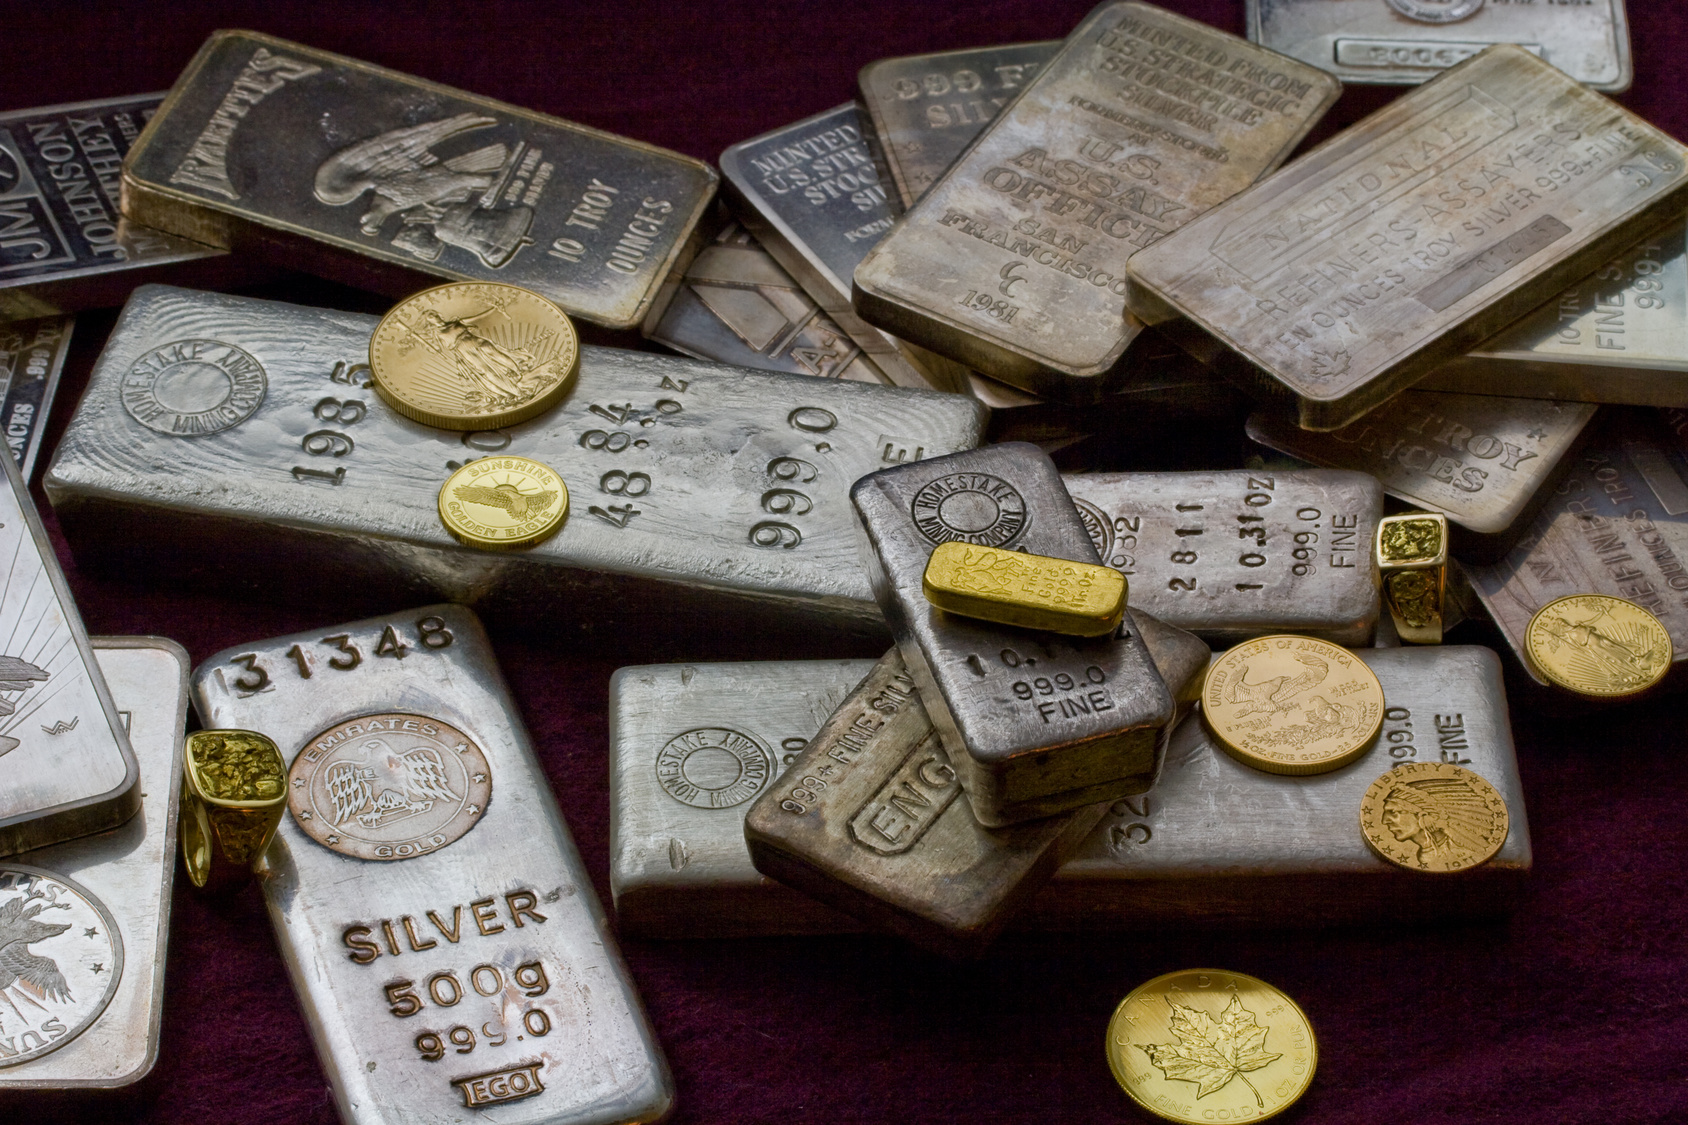 Silver prices to soar by 40%+, here’s the case says analyst